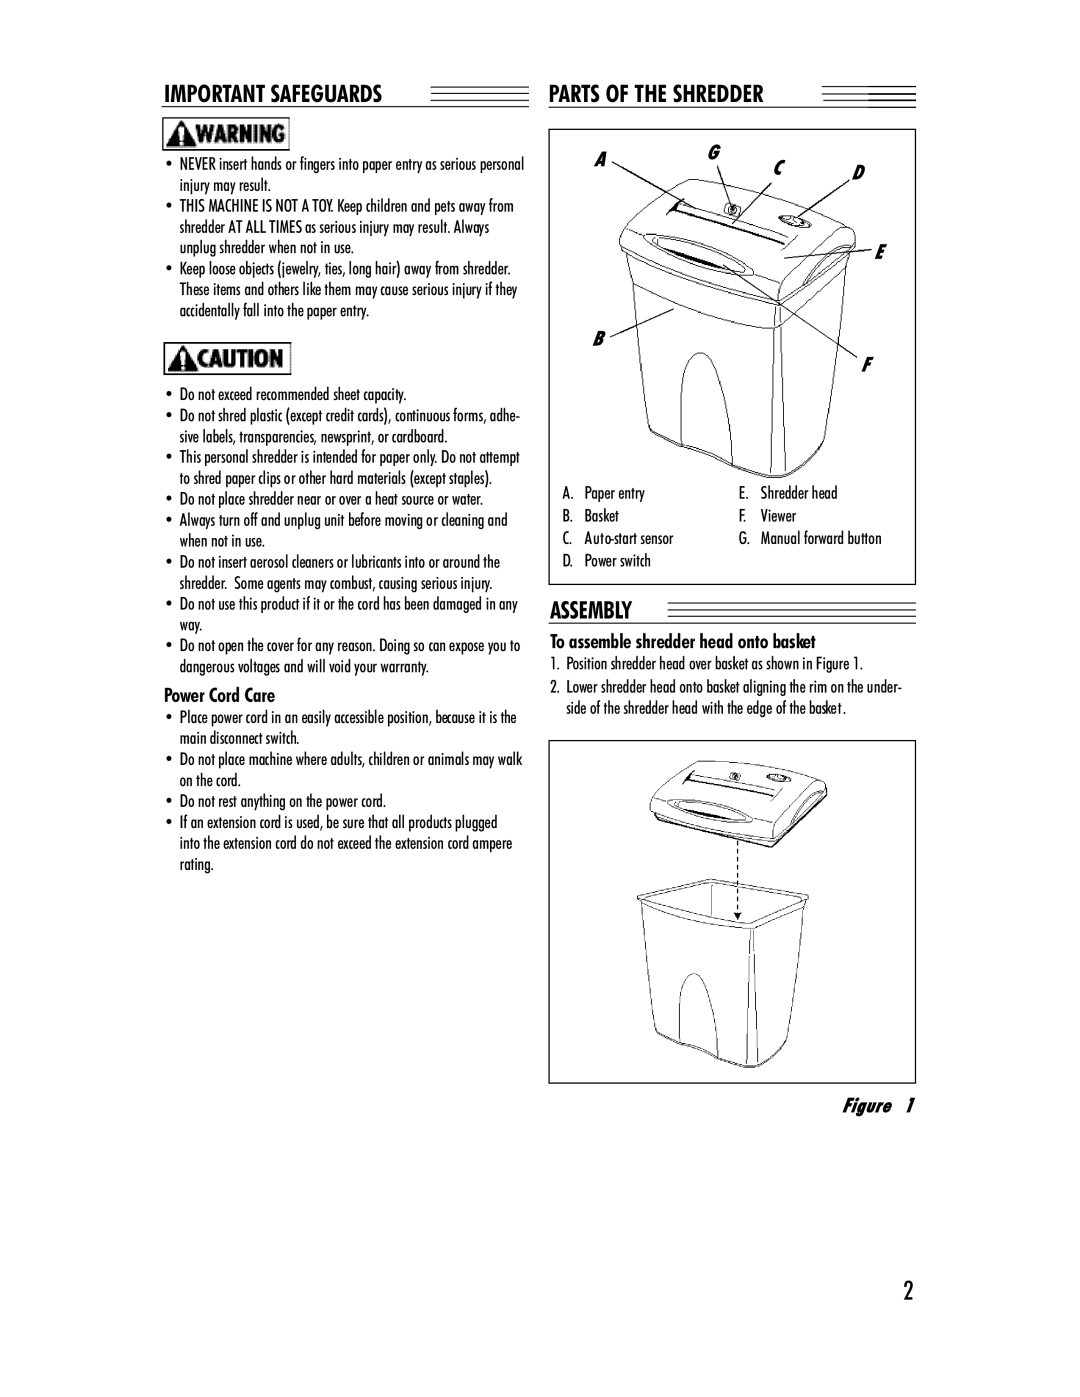 Fellowes P500-2W Important Safeguards, Assembly, Power Cord Care, A G C D E B F, To assemble shredder head onto basket 